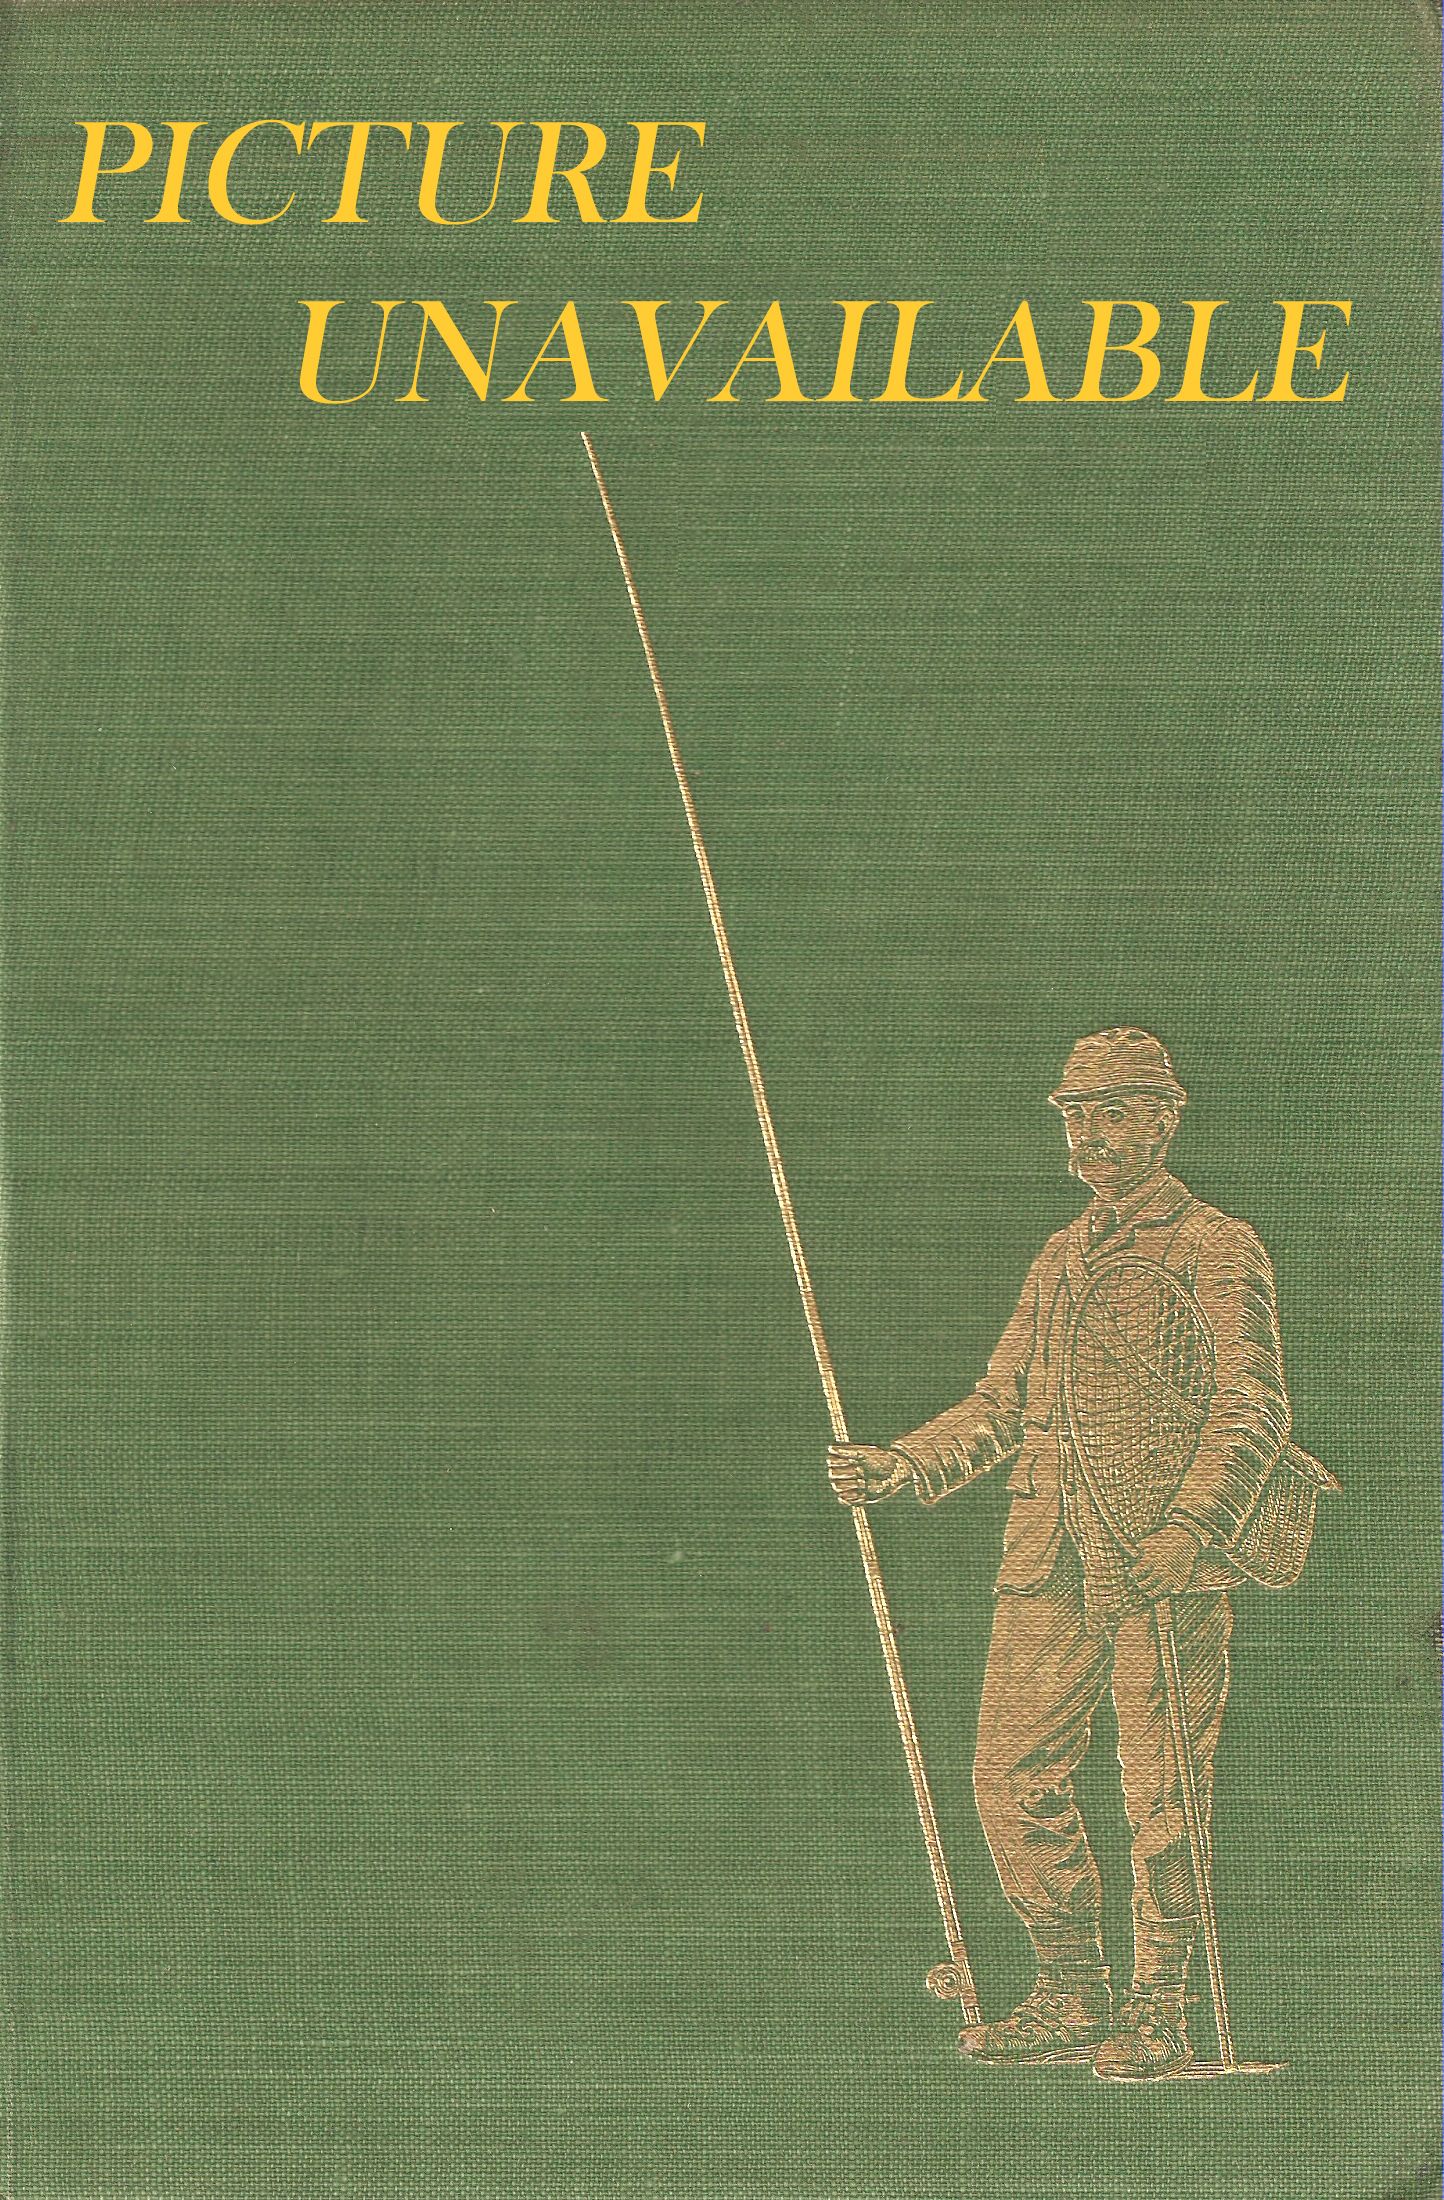 BRIDLE and GUN: ESSAYS OF AN UNDISTINGUISHED SPORTSMAN. By J.E.F. Rawlings.